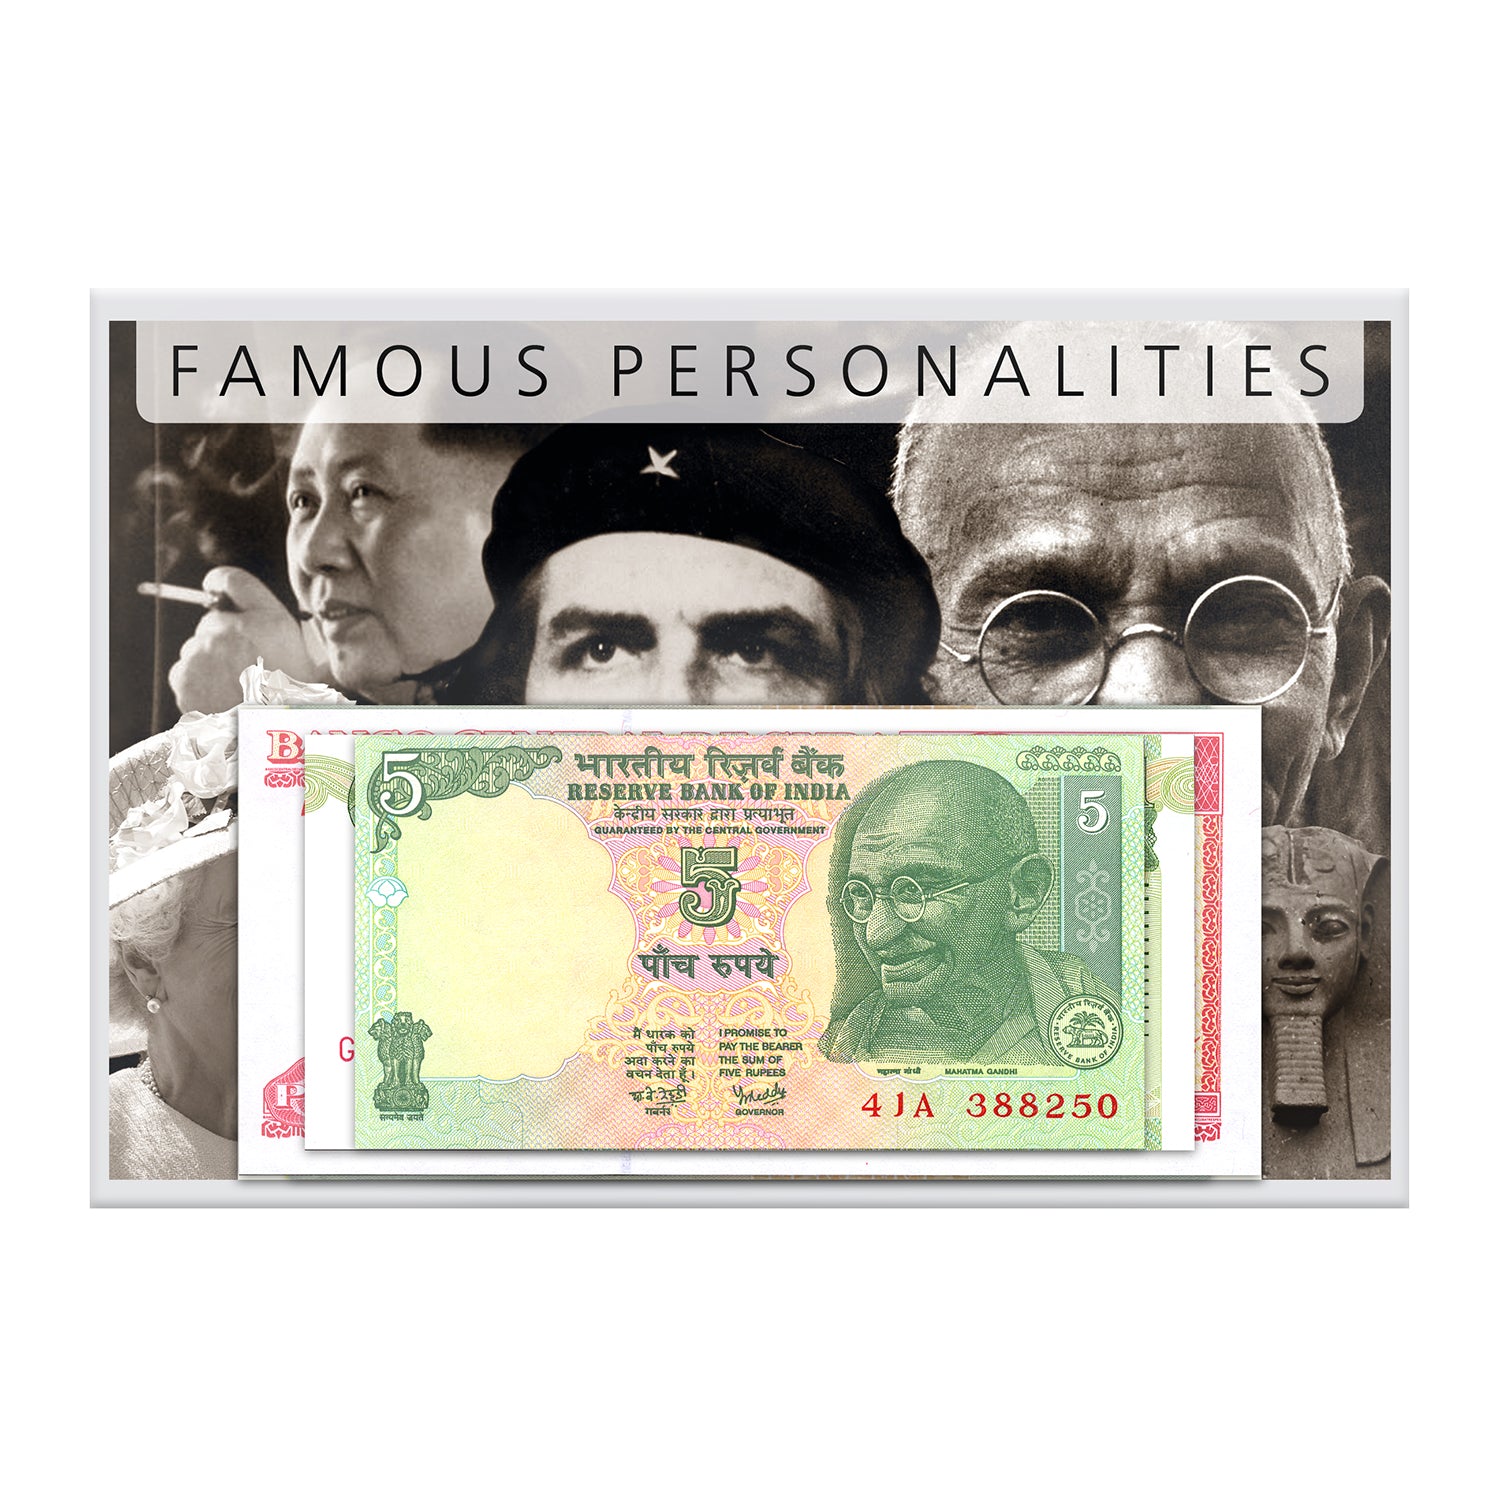 Banknote Collection "Famous Personalities"